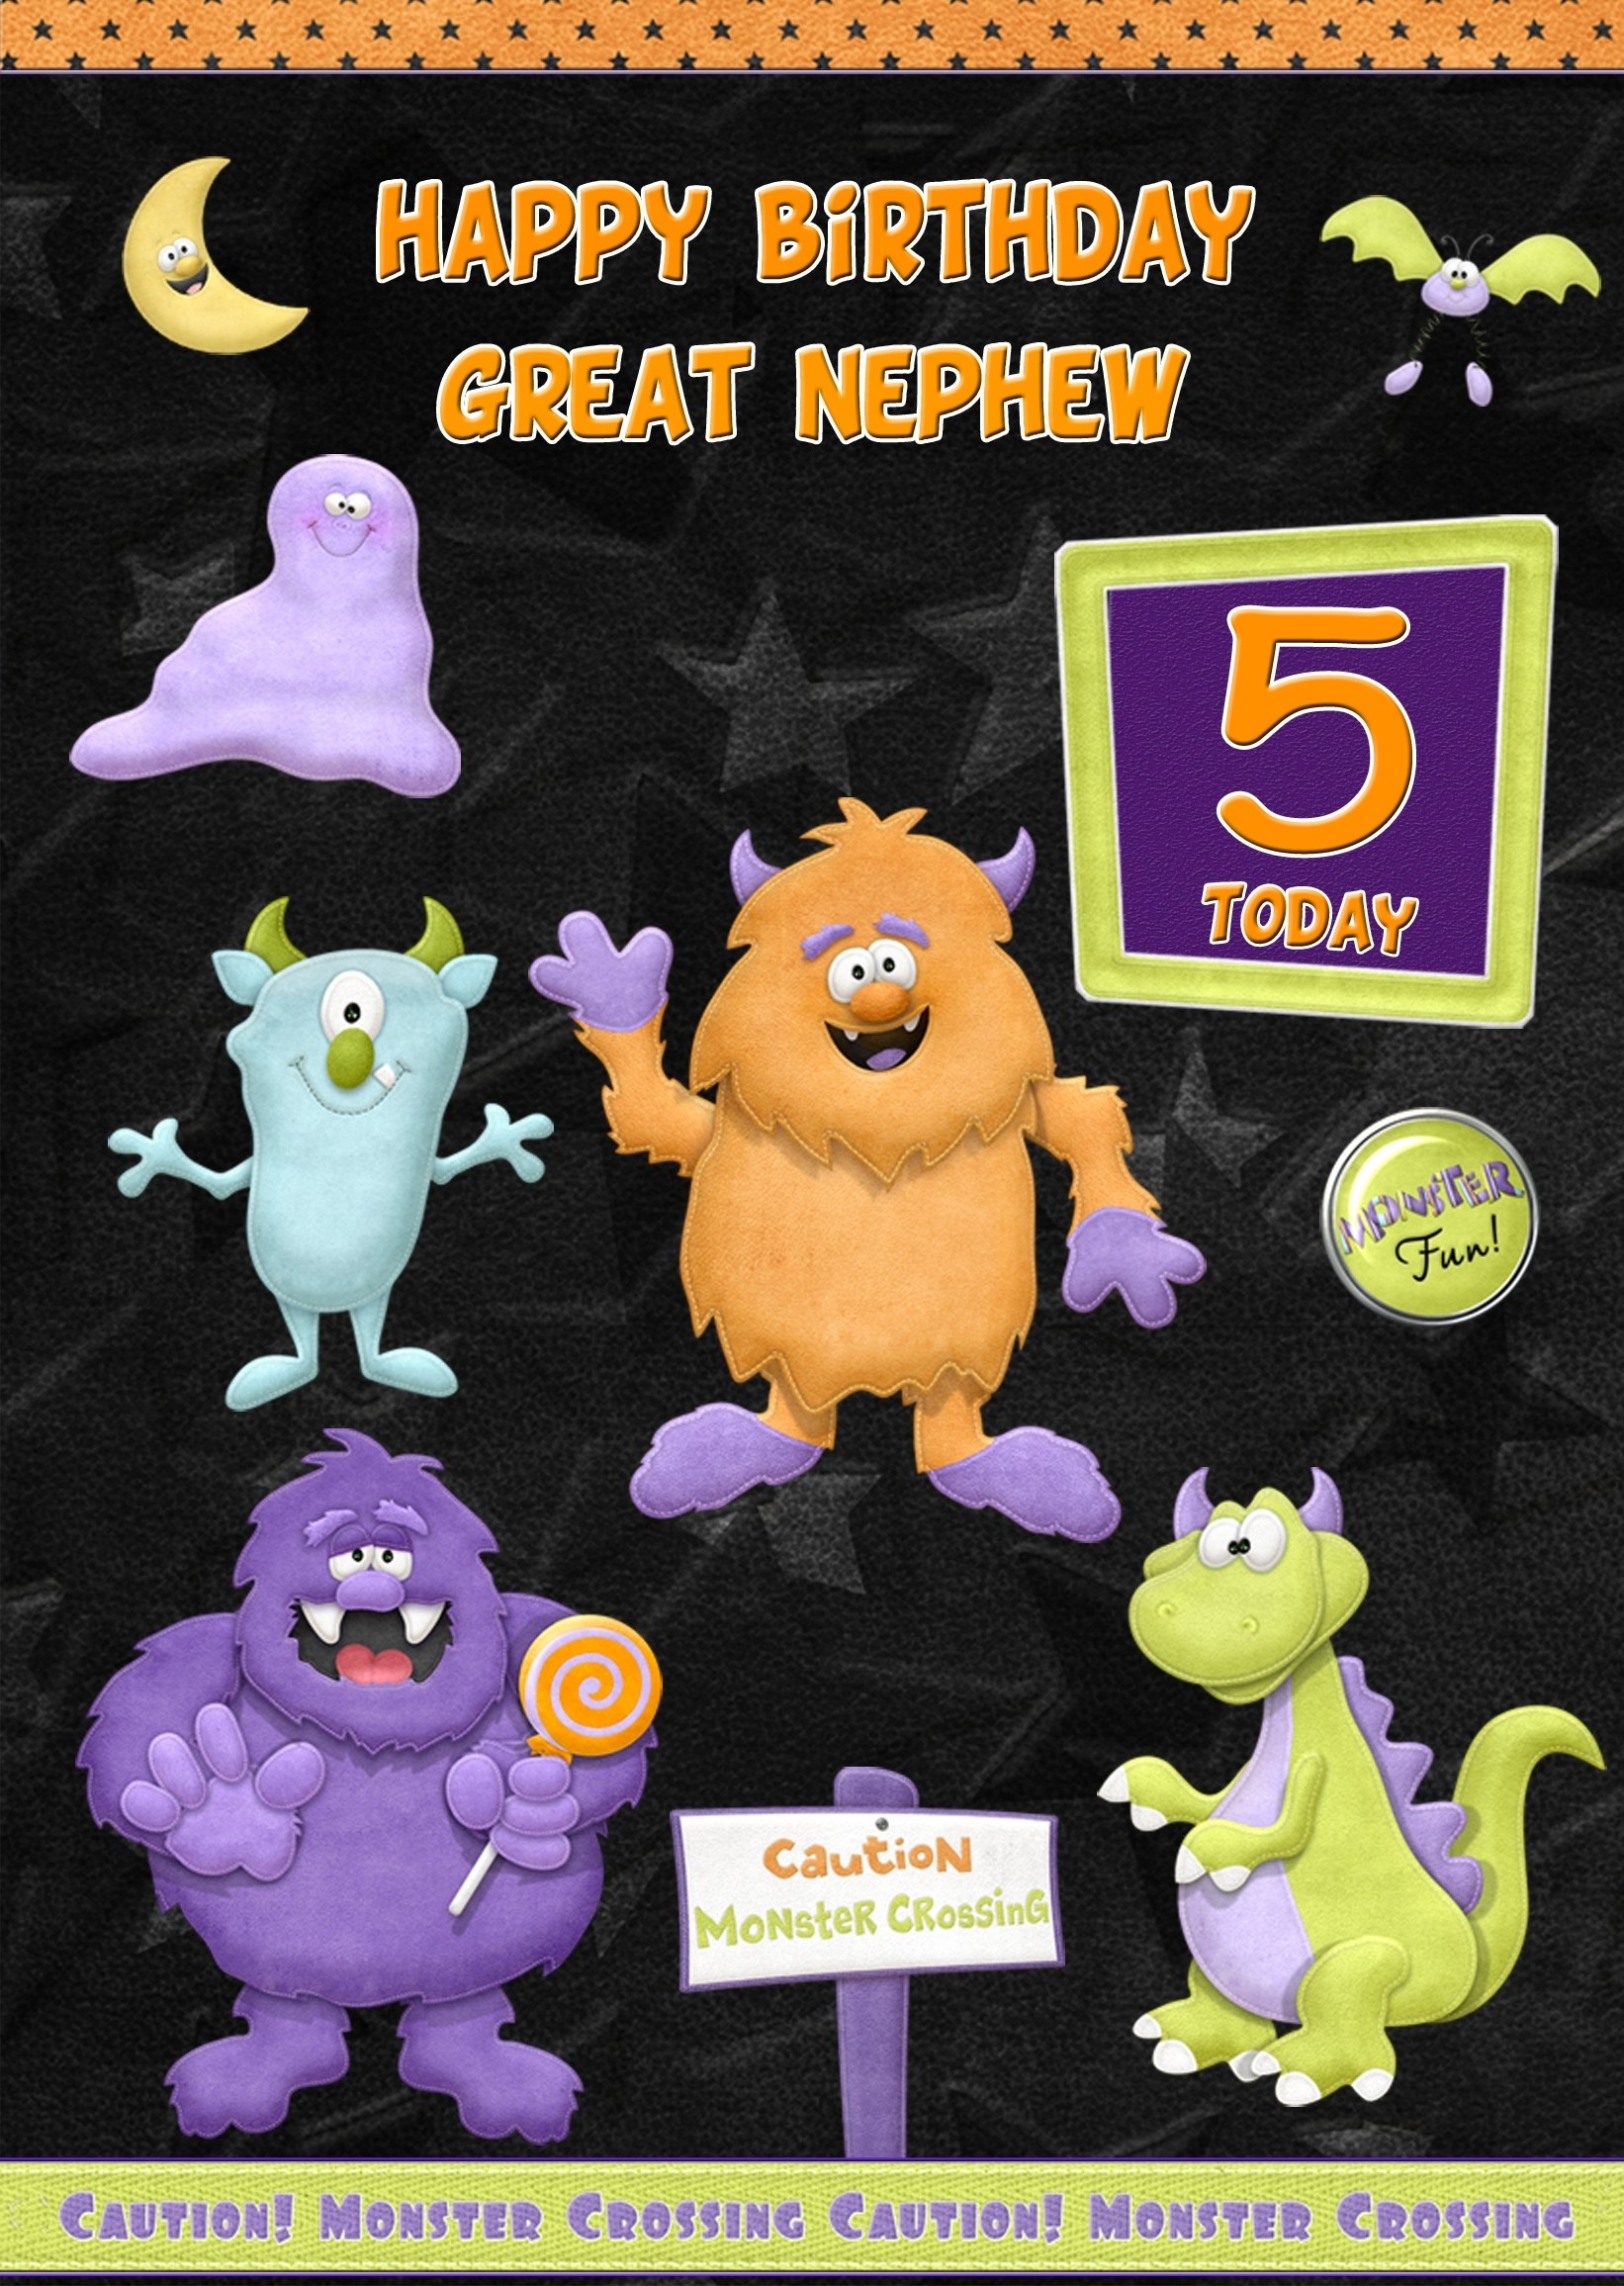 Kids 5th Birthday Funny Monster Cartoon Card for Great Nephew